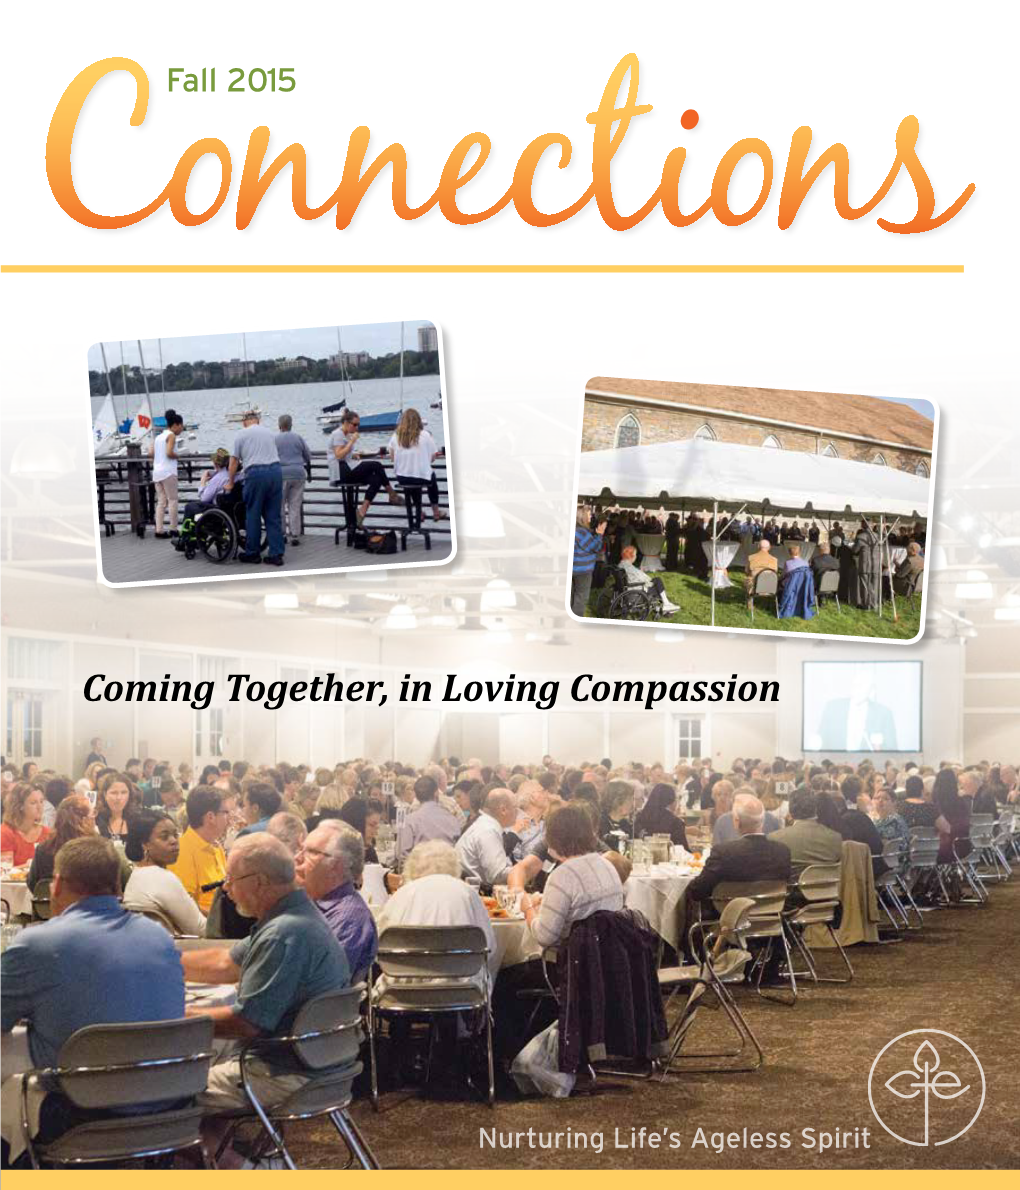 Coming Together, in Loving Compassion